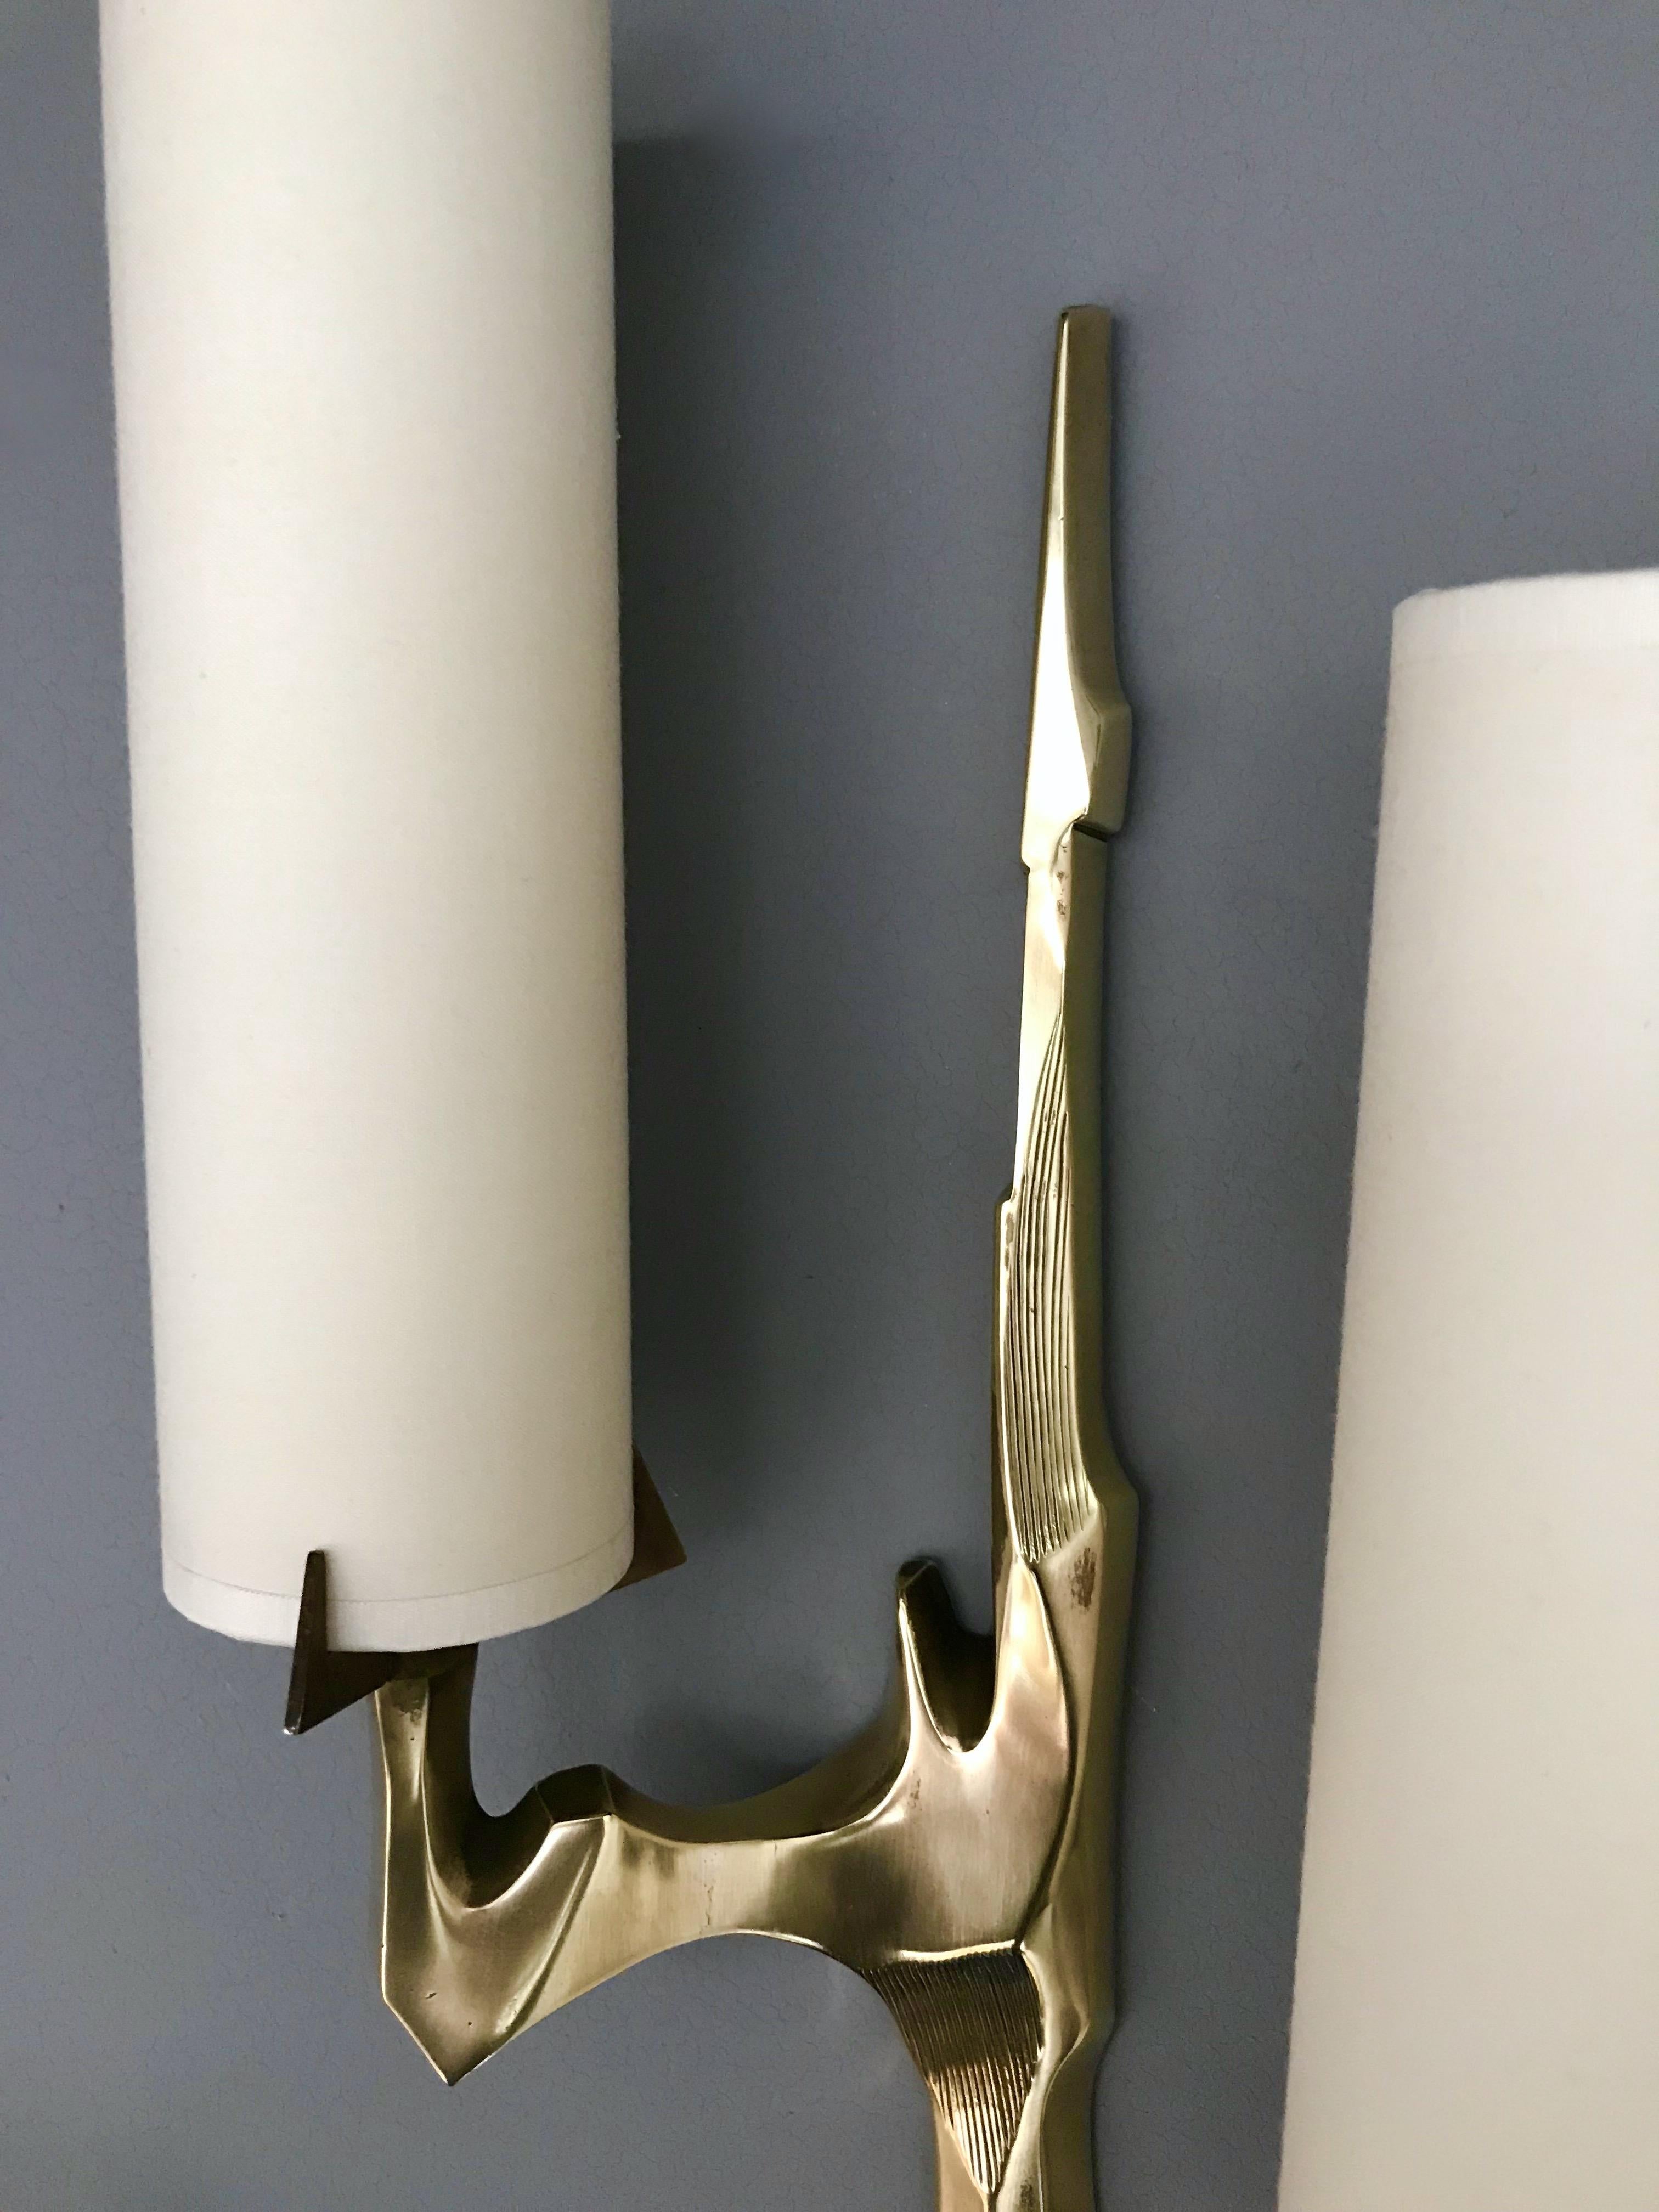 Pair of sconces or wall lights by Maison Arlus based on Felix Agostini drawing for the manufacture. In cast gilt bronze, very interesting and sculptural model. On request original Arlus advertising from the 1960s. It’s a famous manufacture like